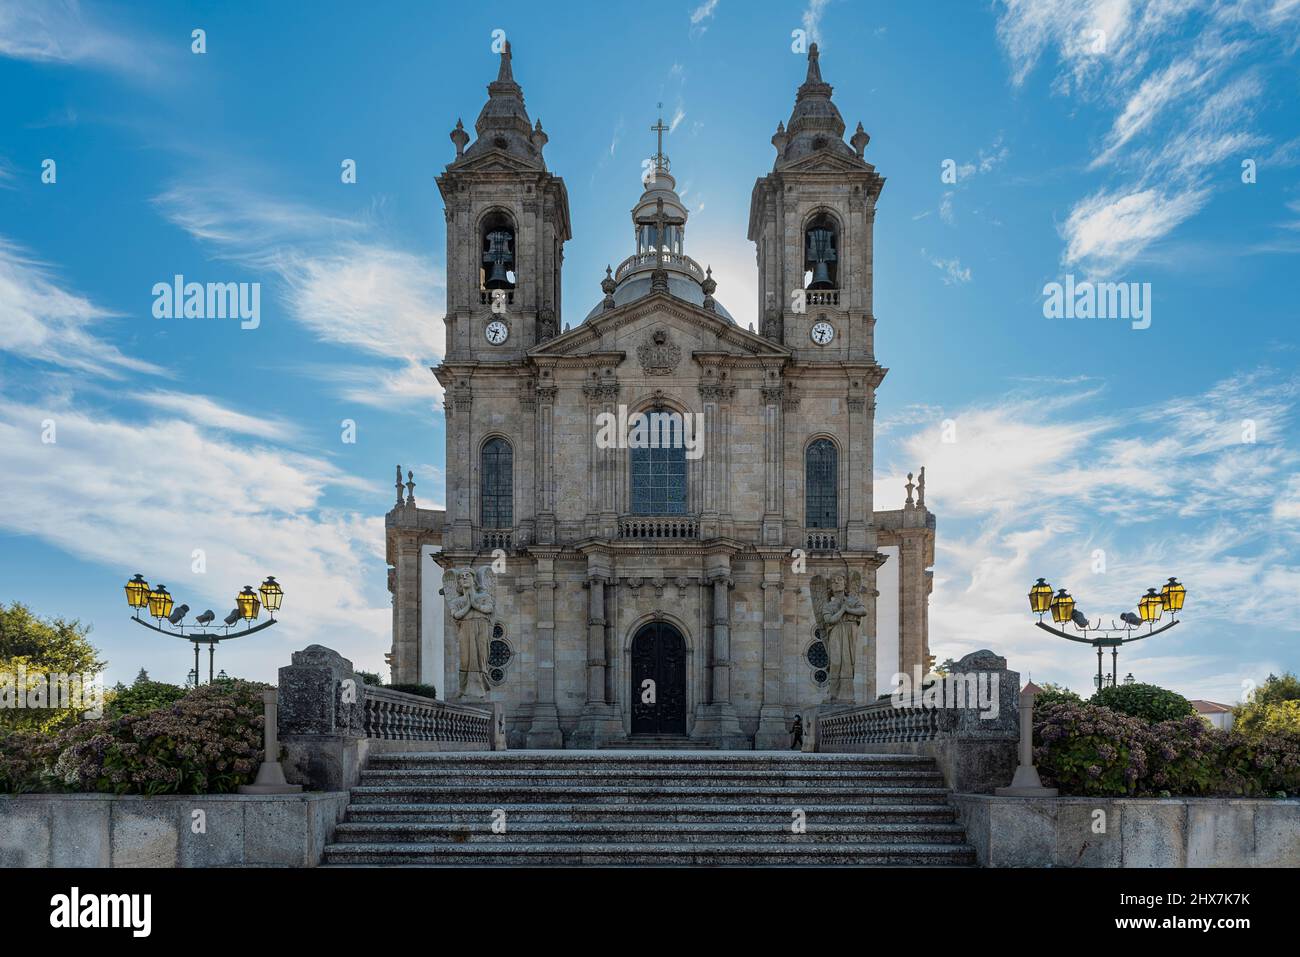 Facade of the Sameiro basilica in Portugal with the stairs in the foreground and the two huge lampposts on the sides. Stock Photo